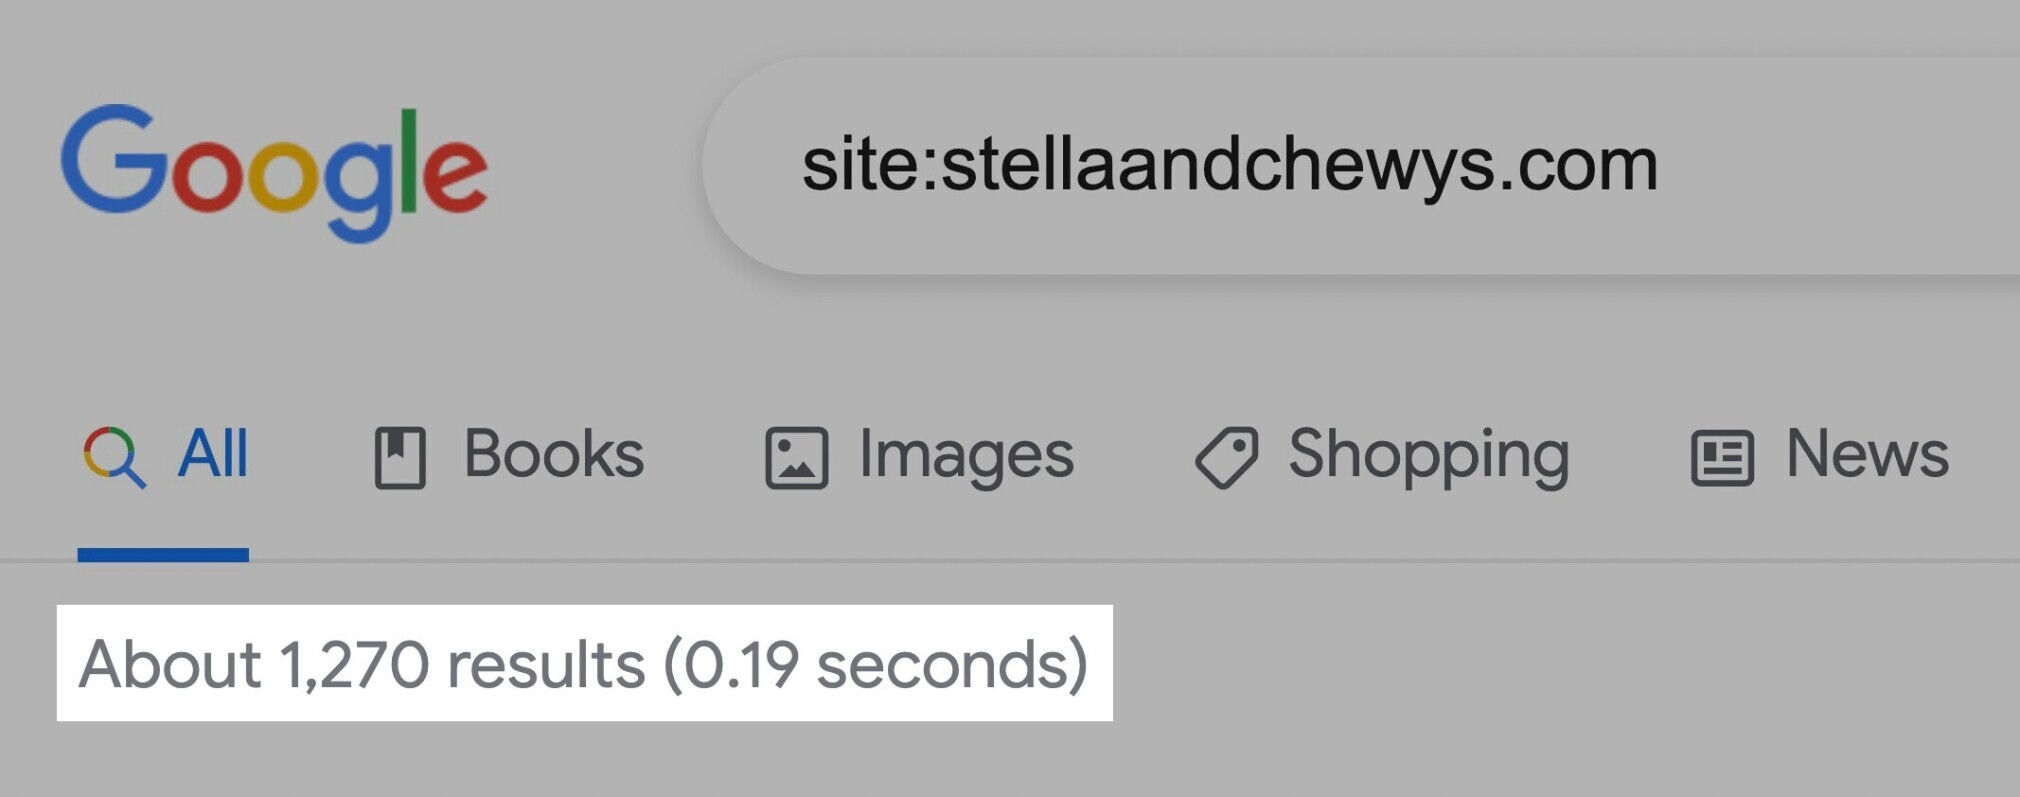 Stella & Chewy's has 1,270 indexed pages, according to Google